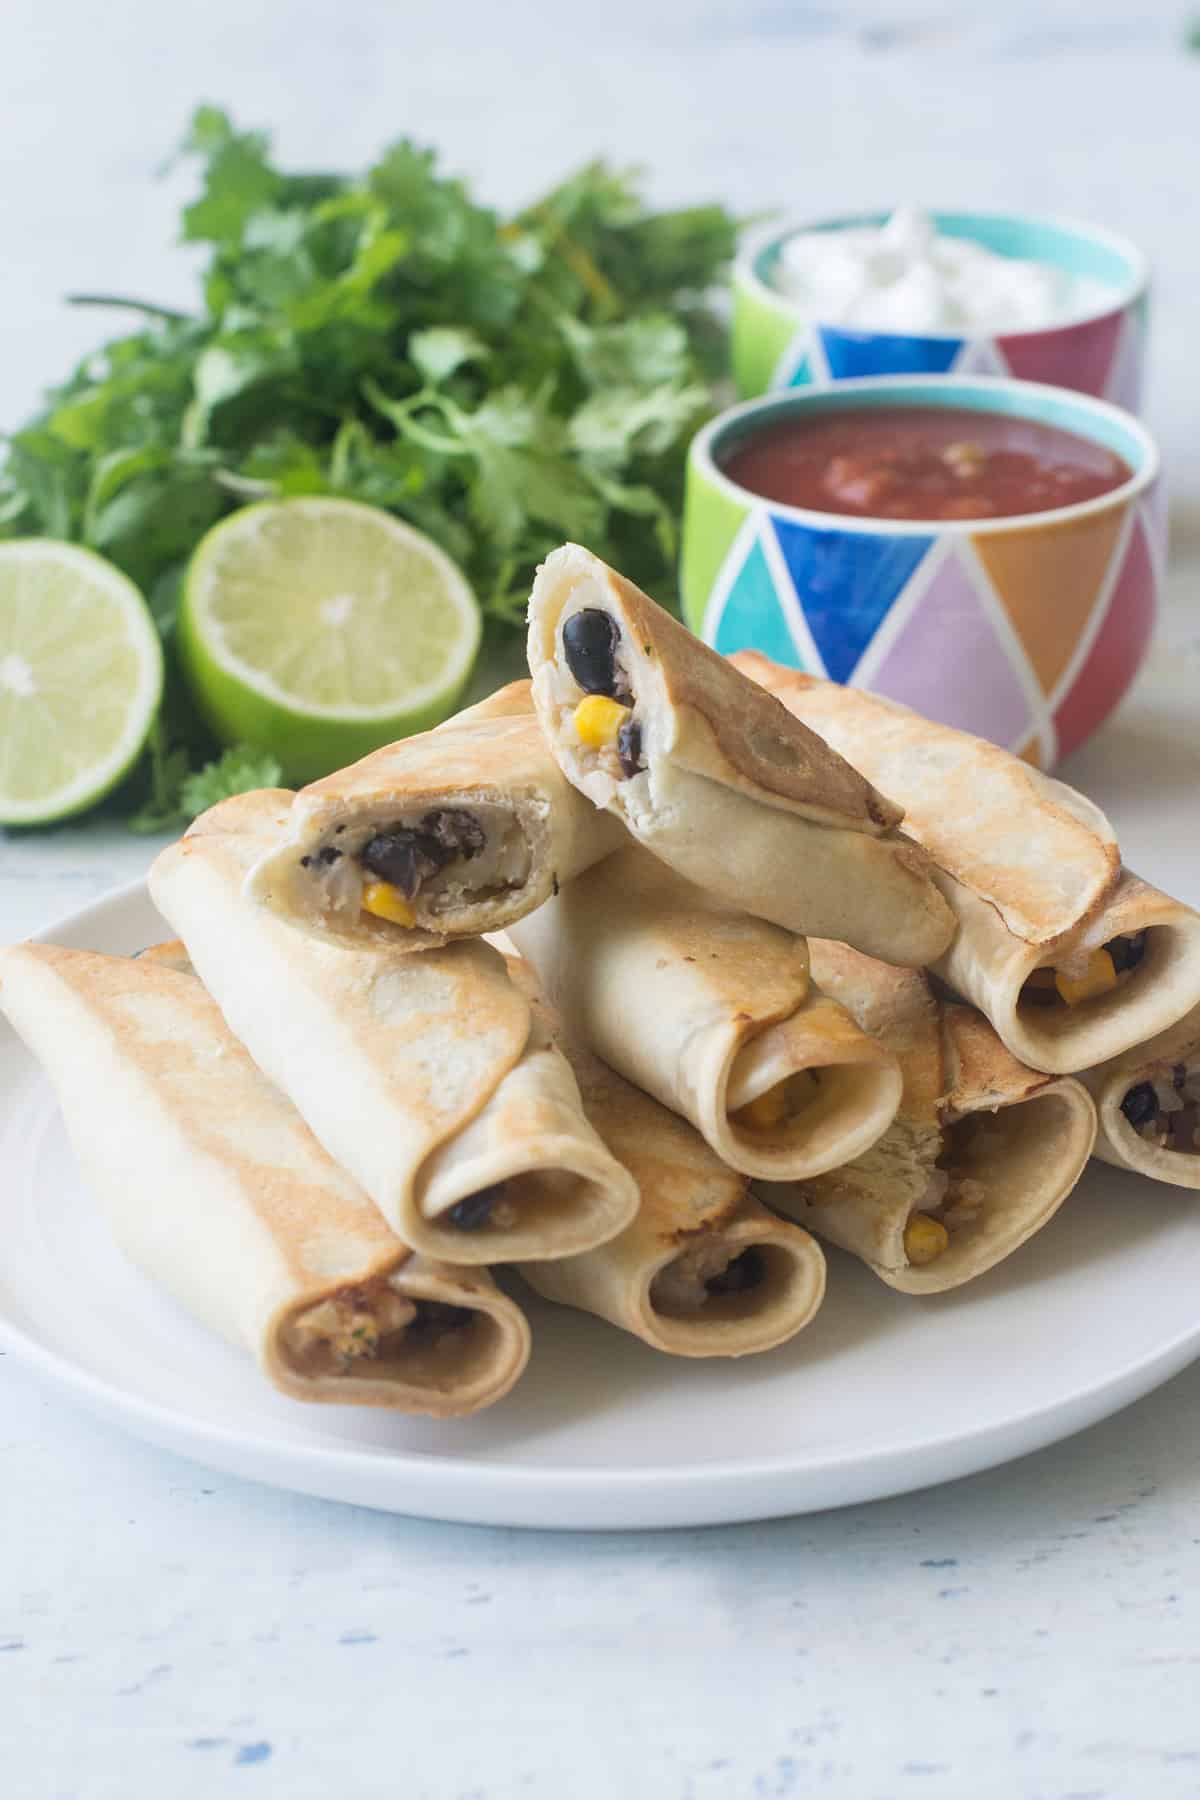 Air Fryer Mexican Cauliflower Rice Taquitos | Healthy, delicious, and ready in under 30 minutes, these Cauliflower Rice Taquitos are the perfect easy weeknight meal. No Air Fryer. no problem! Oven directions included. | Healthy Family Project #taquitos #airfryerrecipes #healthyrecipes #weeknightmeals